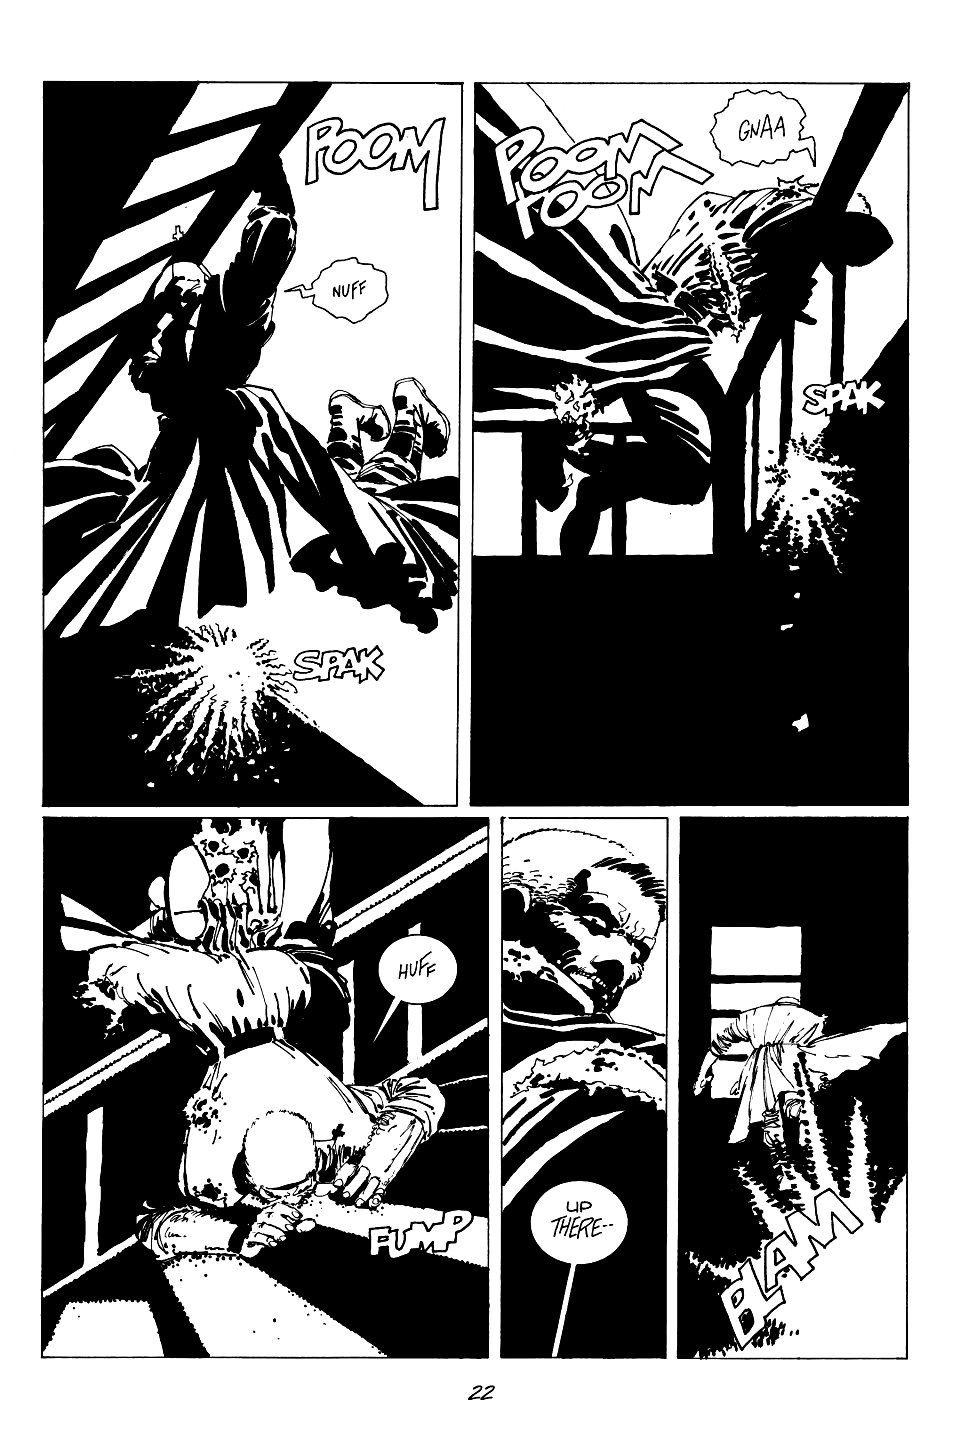 page 22 of sin city 1 the hard goodbye